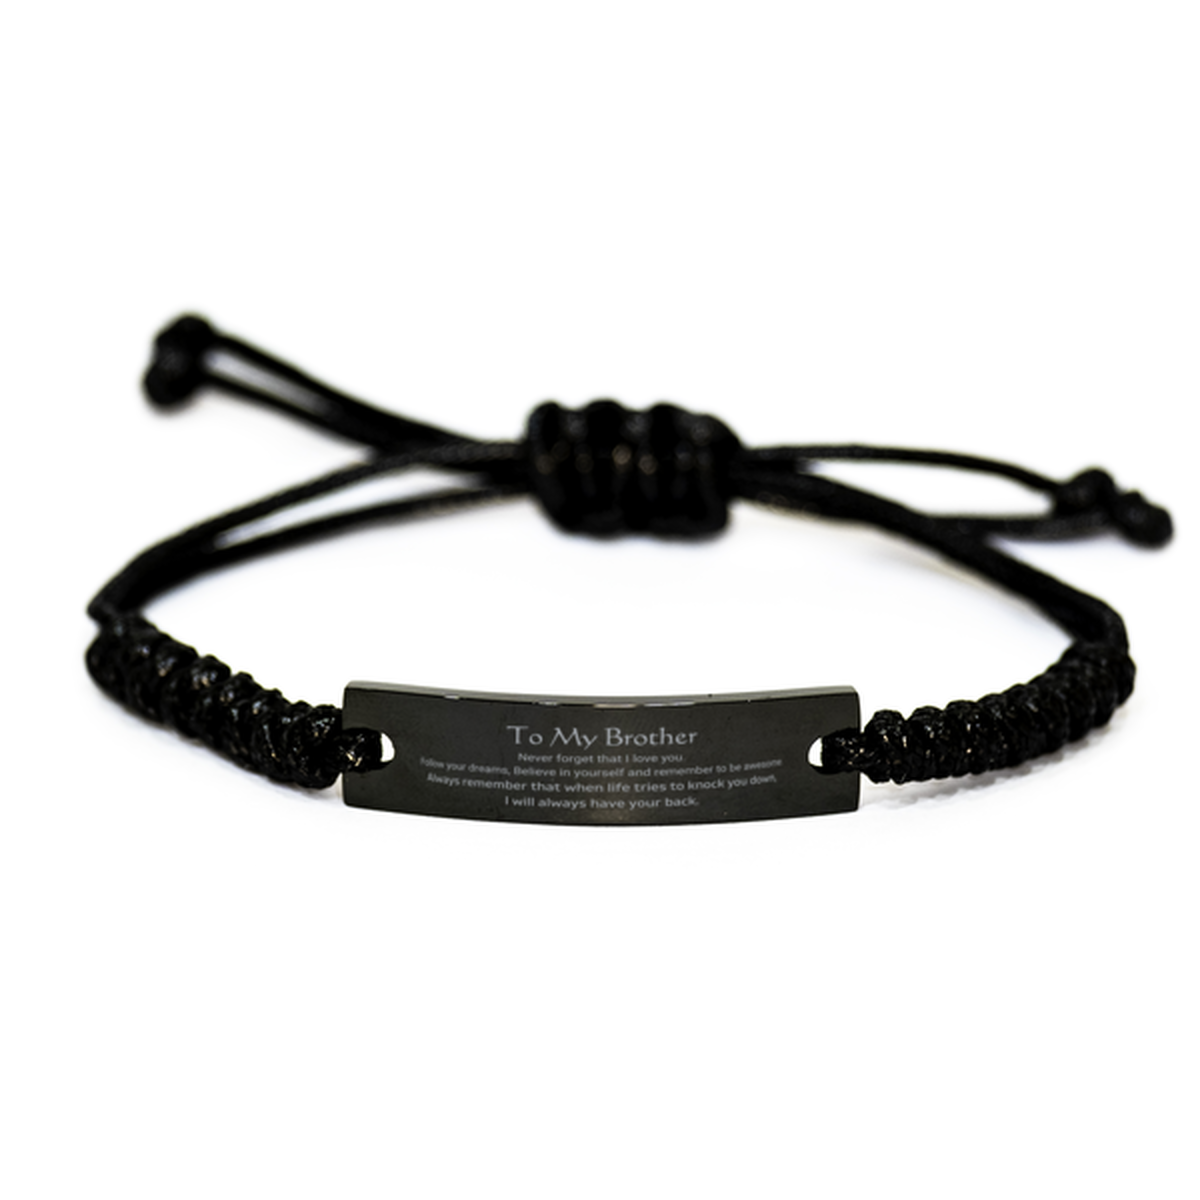 Inspirational Gifts for Brother, Follow your dreams, Believe in yourself, Brother Black Rope Bracelet, Birthday Christmas Unique Gifts For Brother